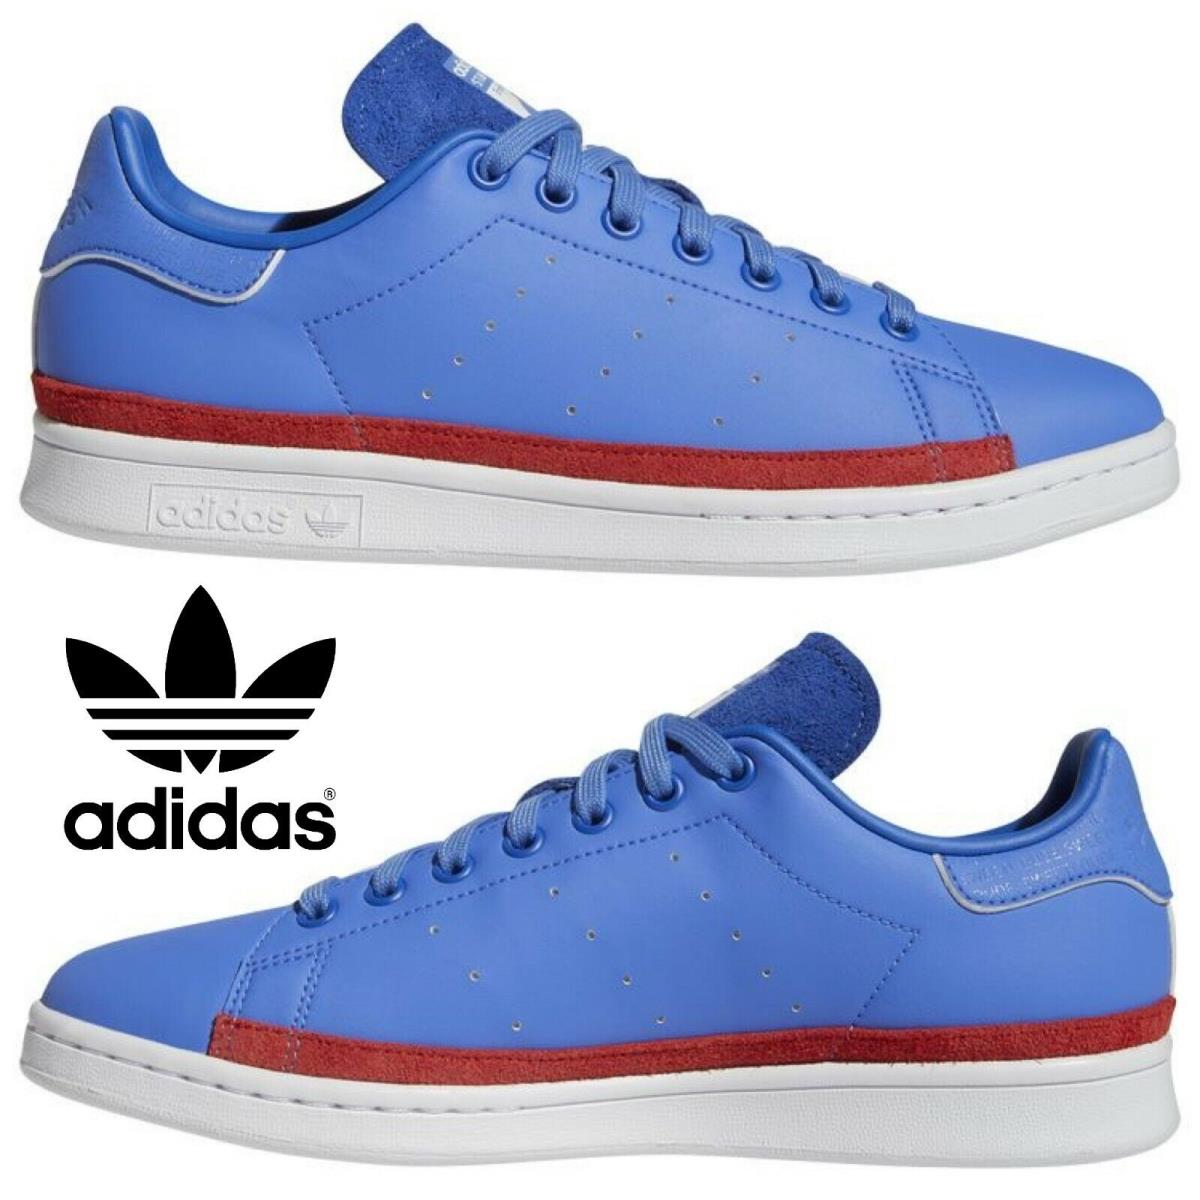 Adidas Originals Stan Smith Men`s Sneakers Comfort Sport Casual Shoes Blue Red